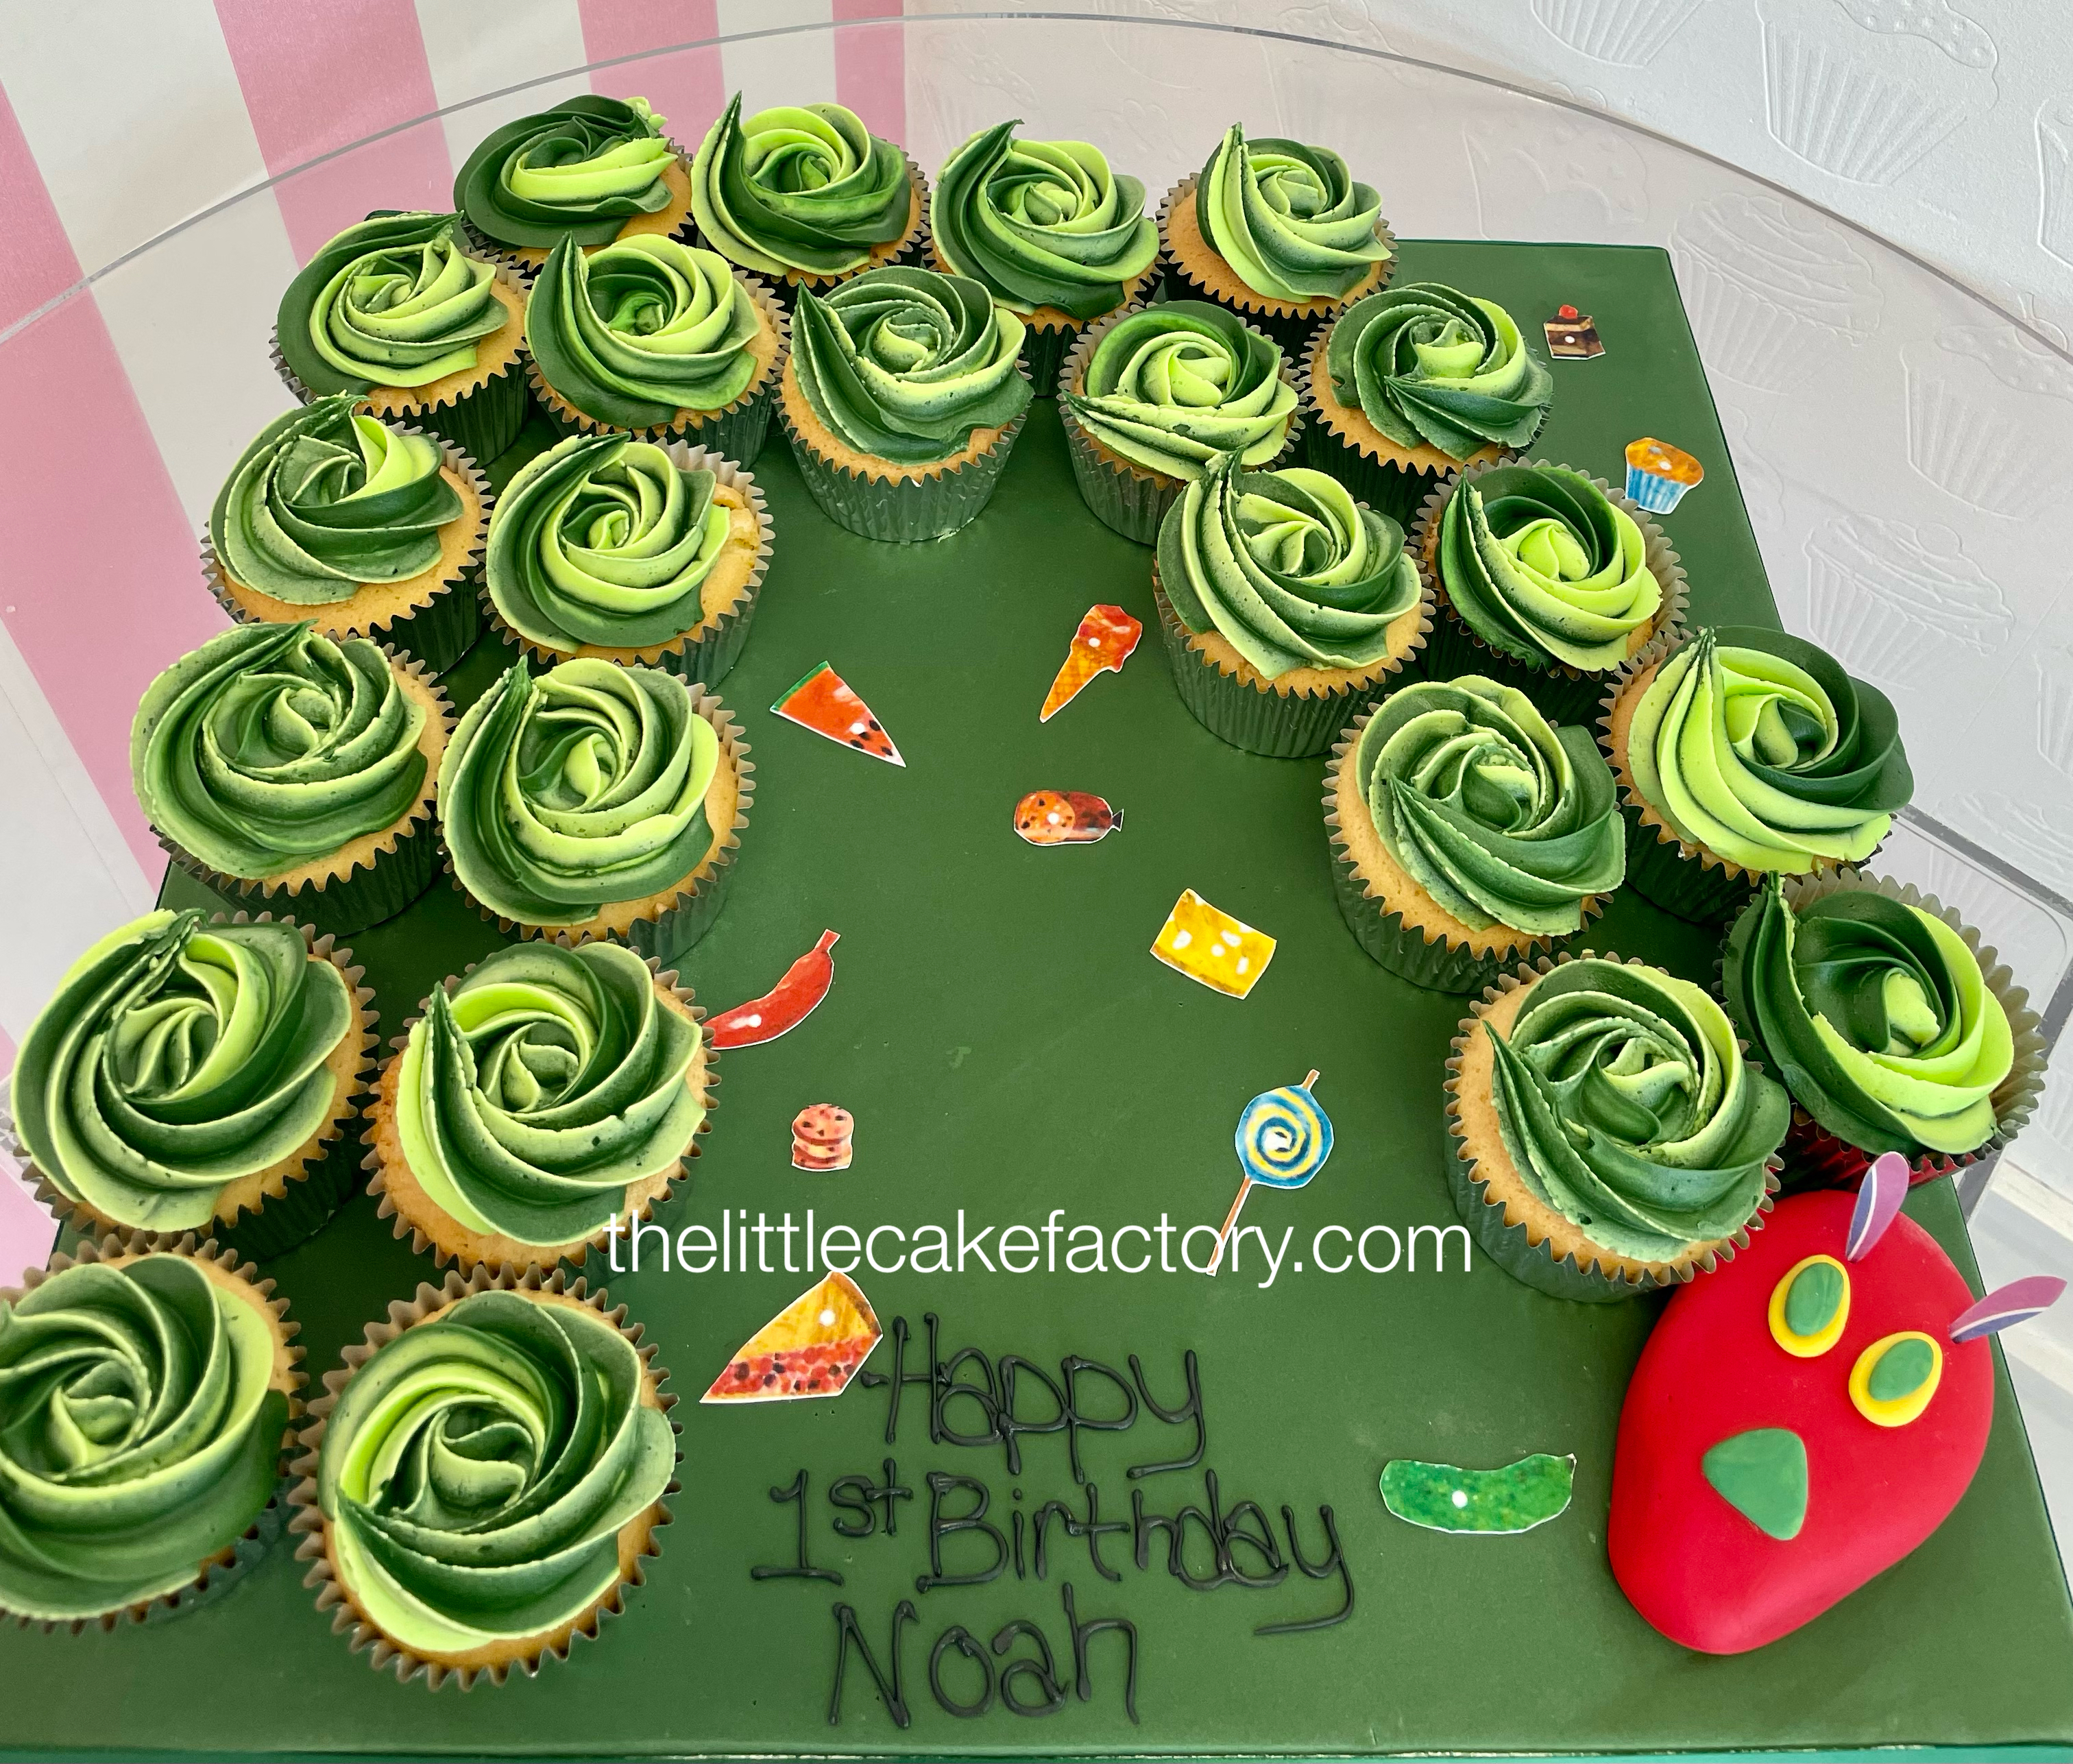 the hungry caterpillar cupcakes Cake | Children Cakes